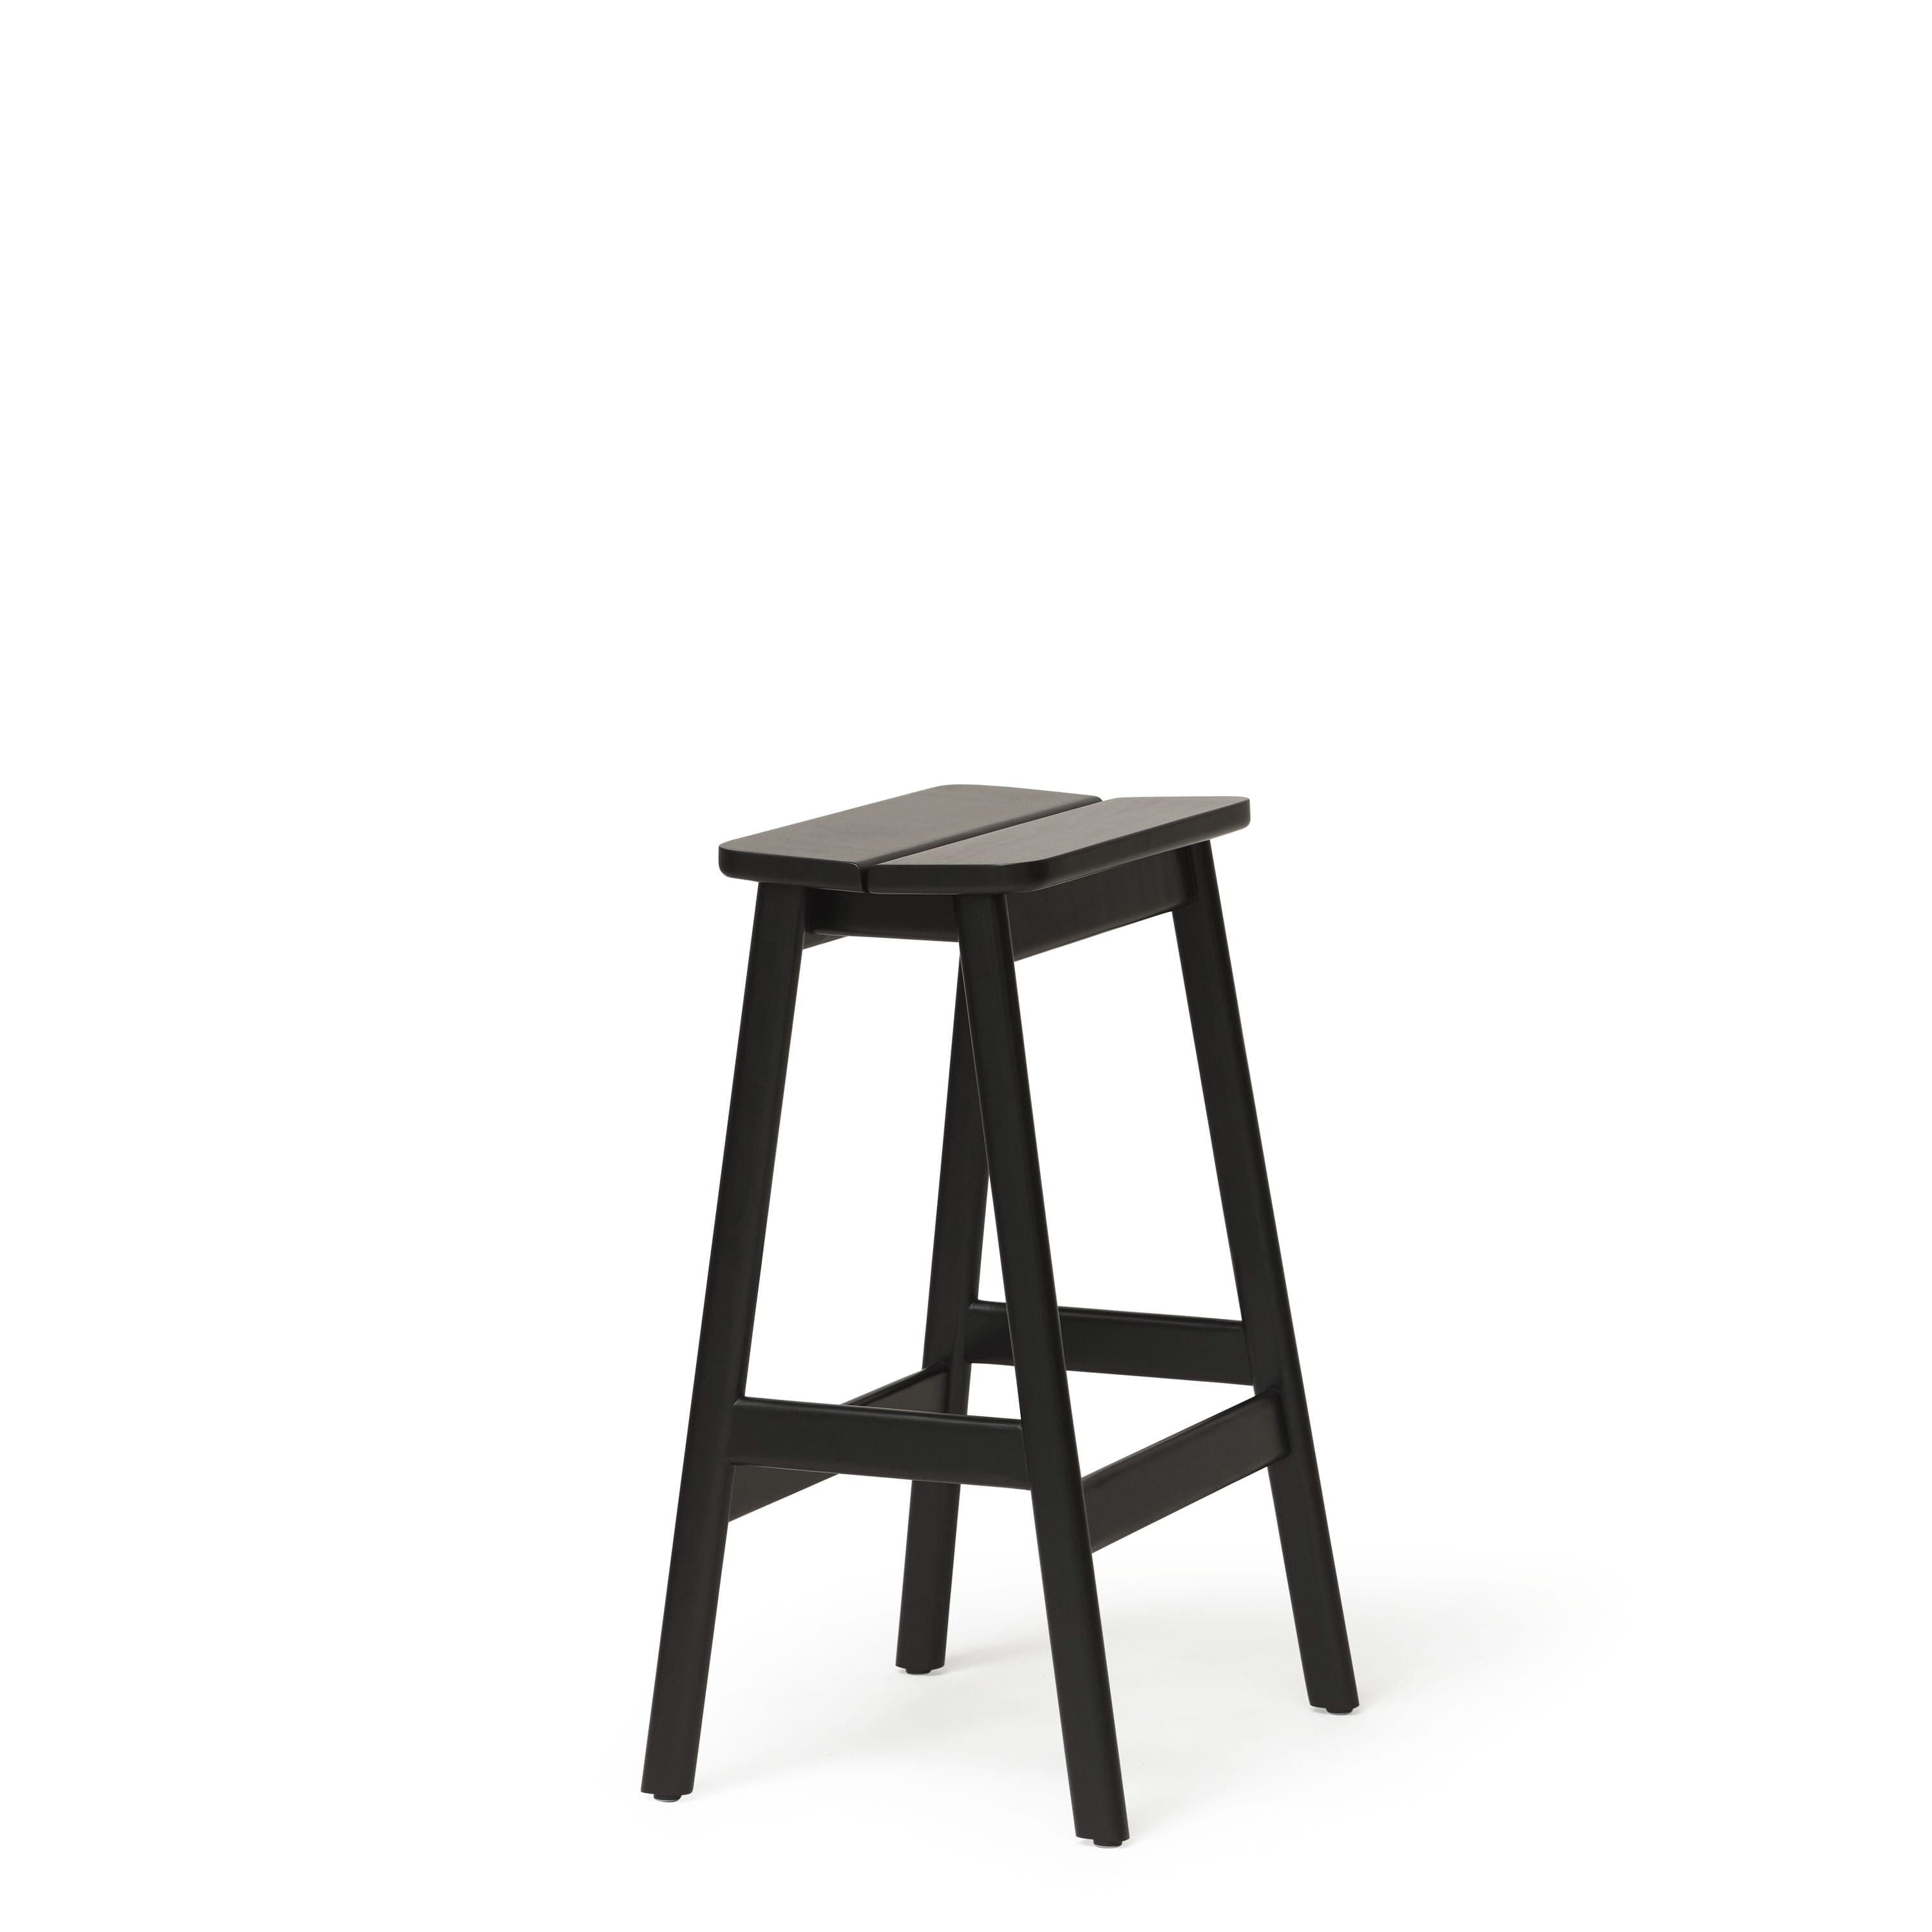 Form & Refine Angle Standard Bar Stool 65 Cm. Black Stained Beech